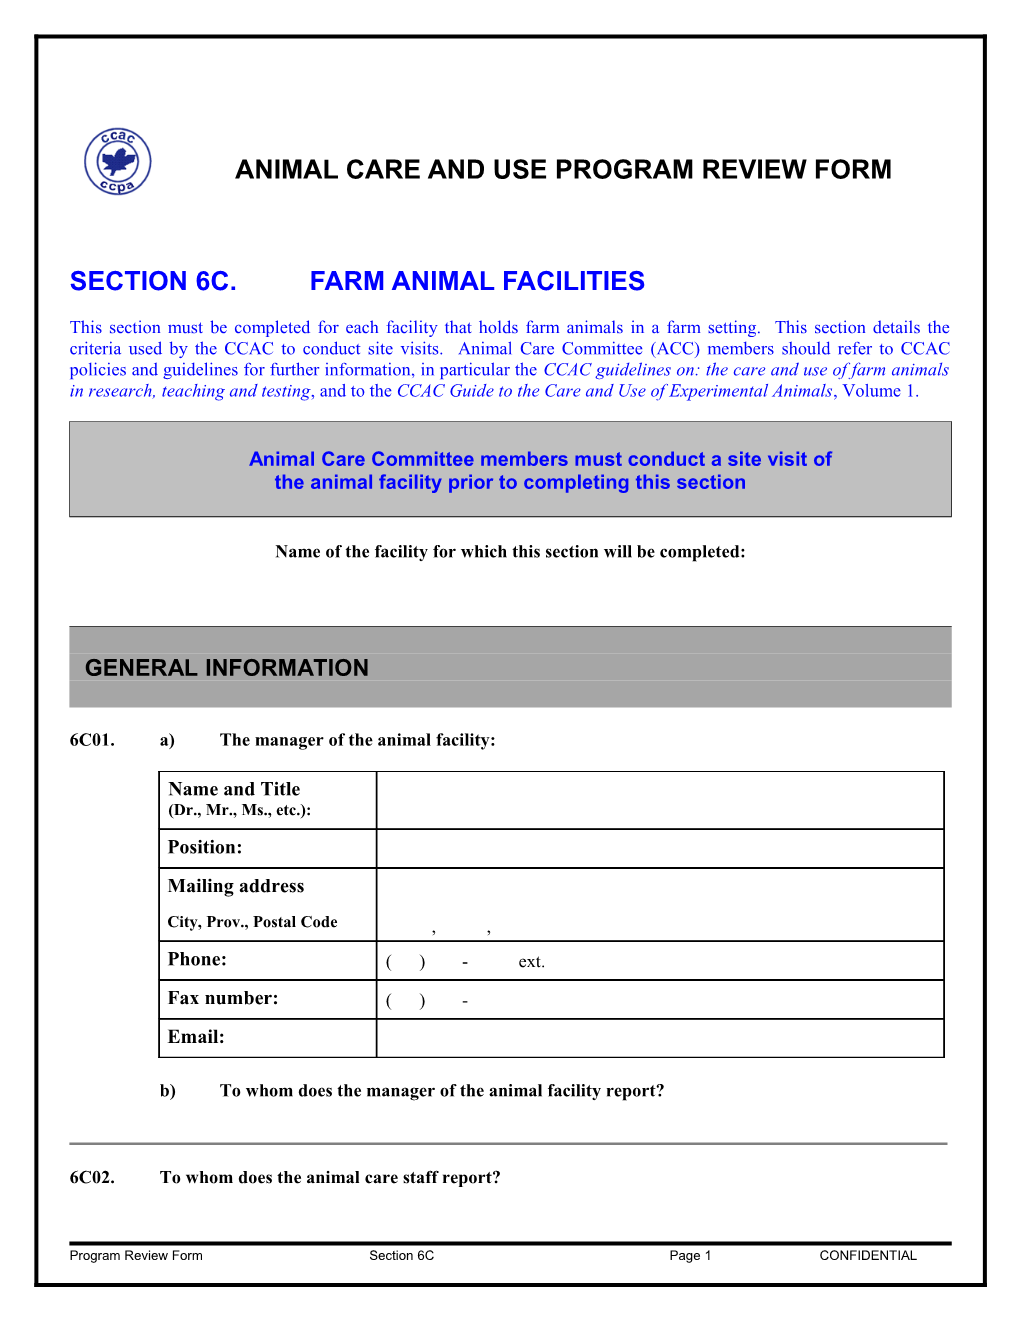 Animal Care and Use Program Review Form